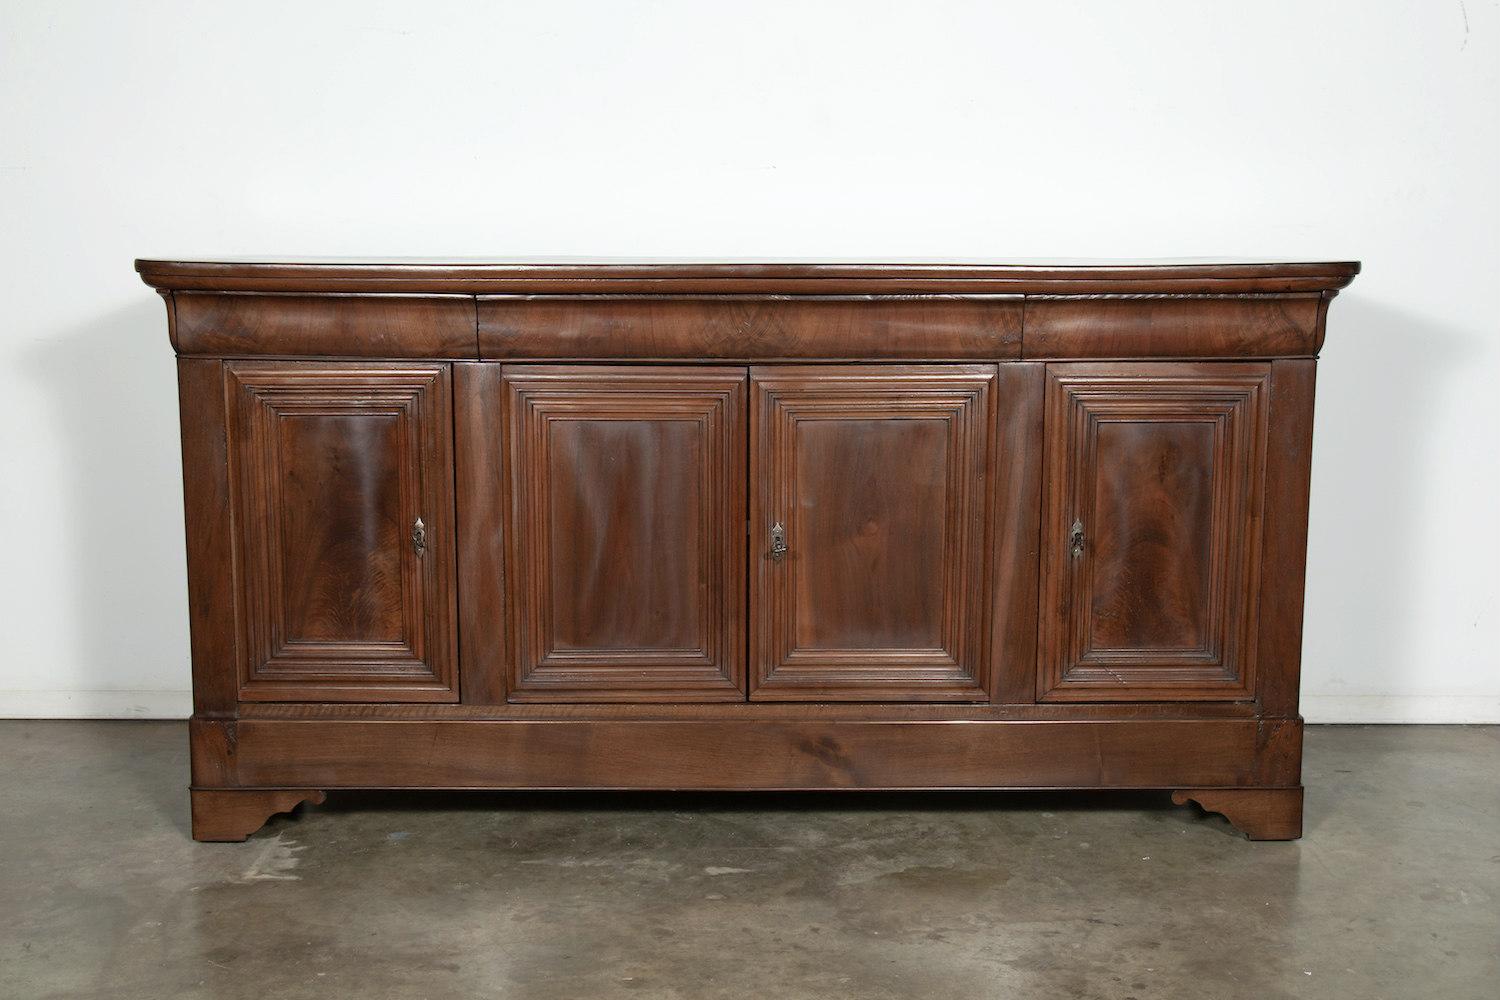 French Louis Philippe enfilade buffet of solid walnut with a bookmatched walnut front, having three doucine drawers over four paneled doors. Resting on shaped bracket feet. The shapely feet have a distinct shape designed to be seen from all sides